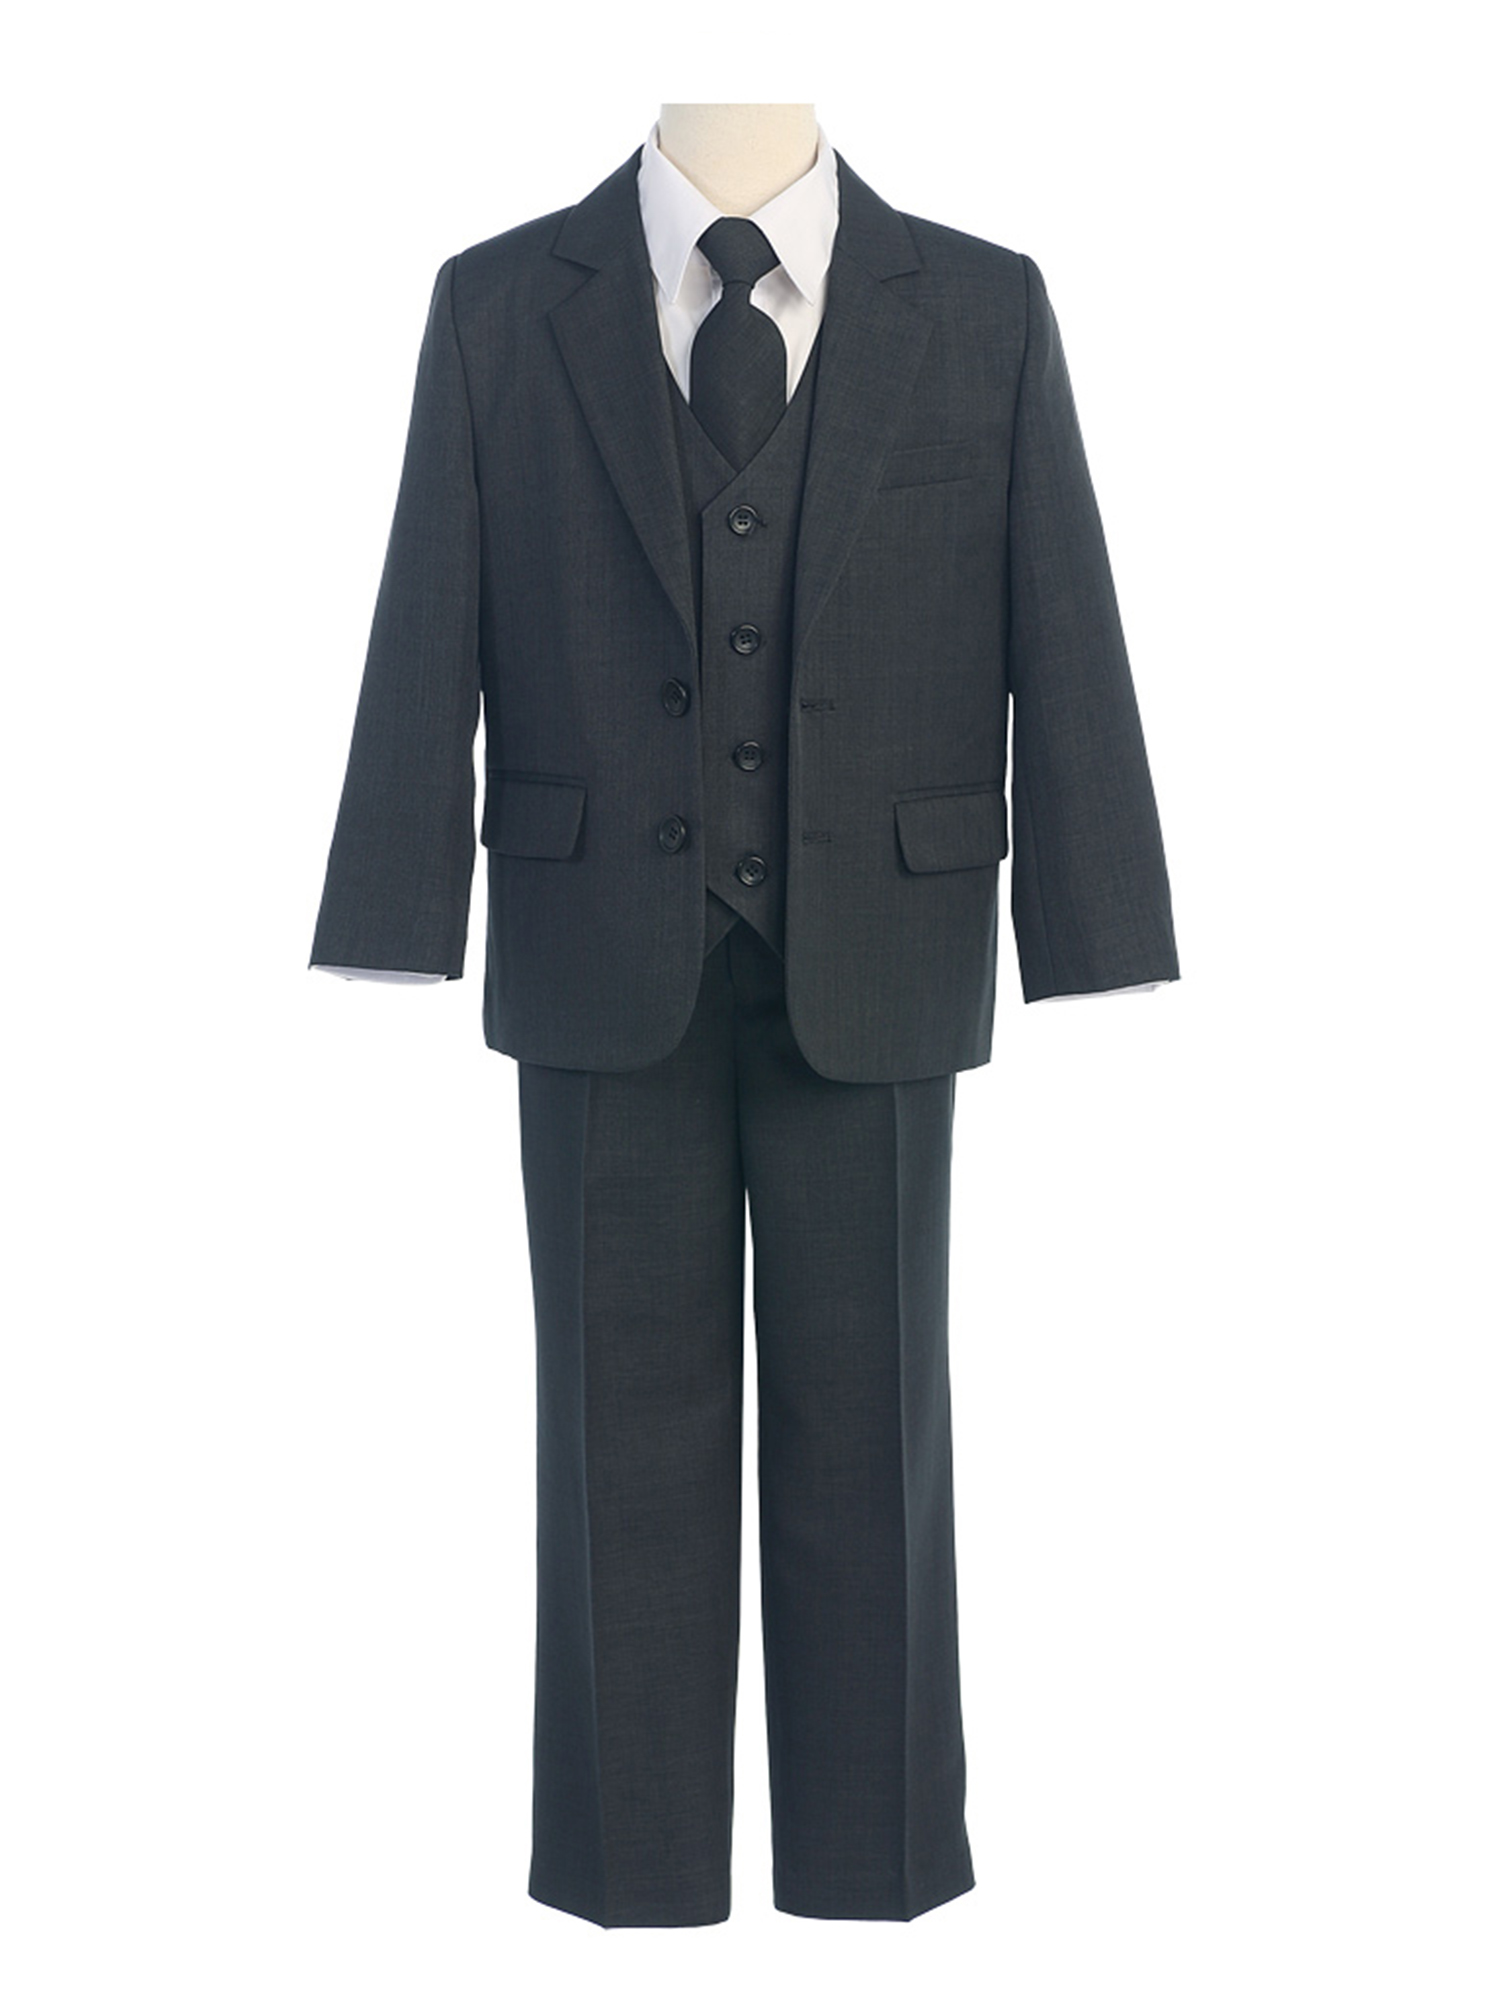 COLE Boys Suit with Shirt and Vest (5-Piece) - Charcoal Grey - Size 14